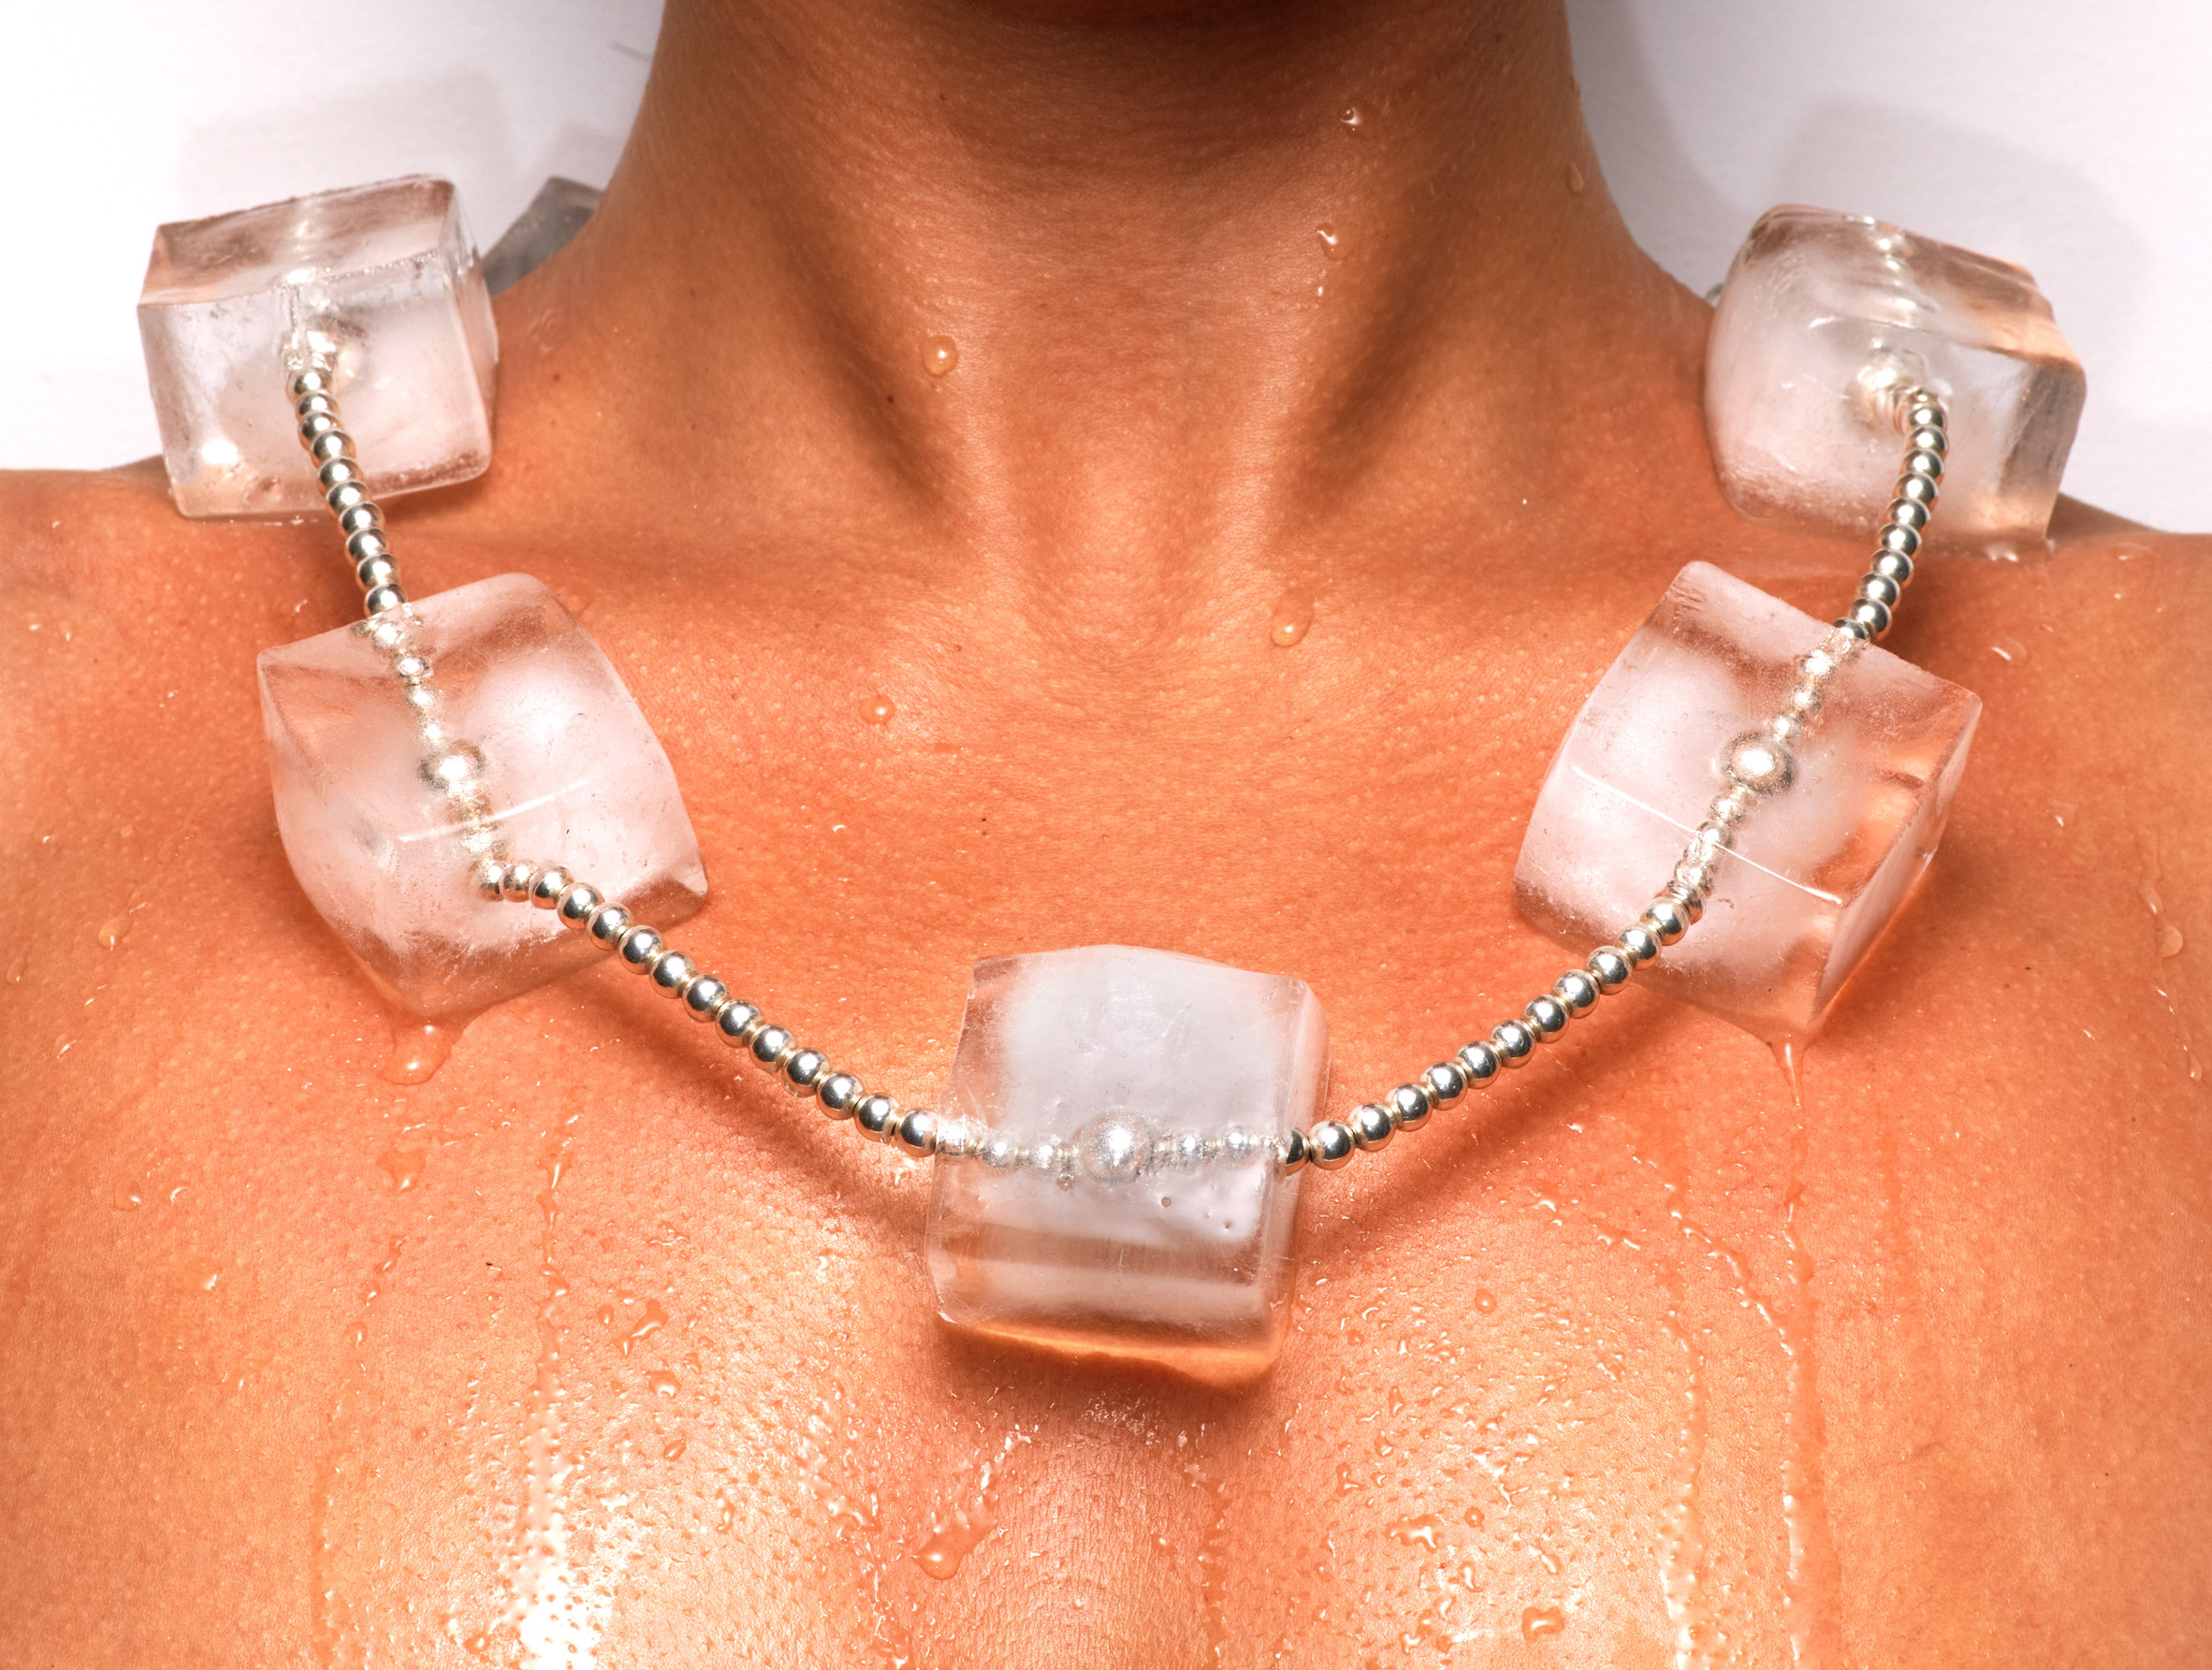 Person wearing necklace made from melting ice cubes on silver chain